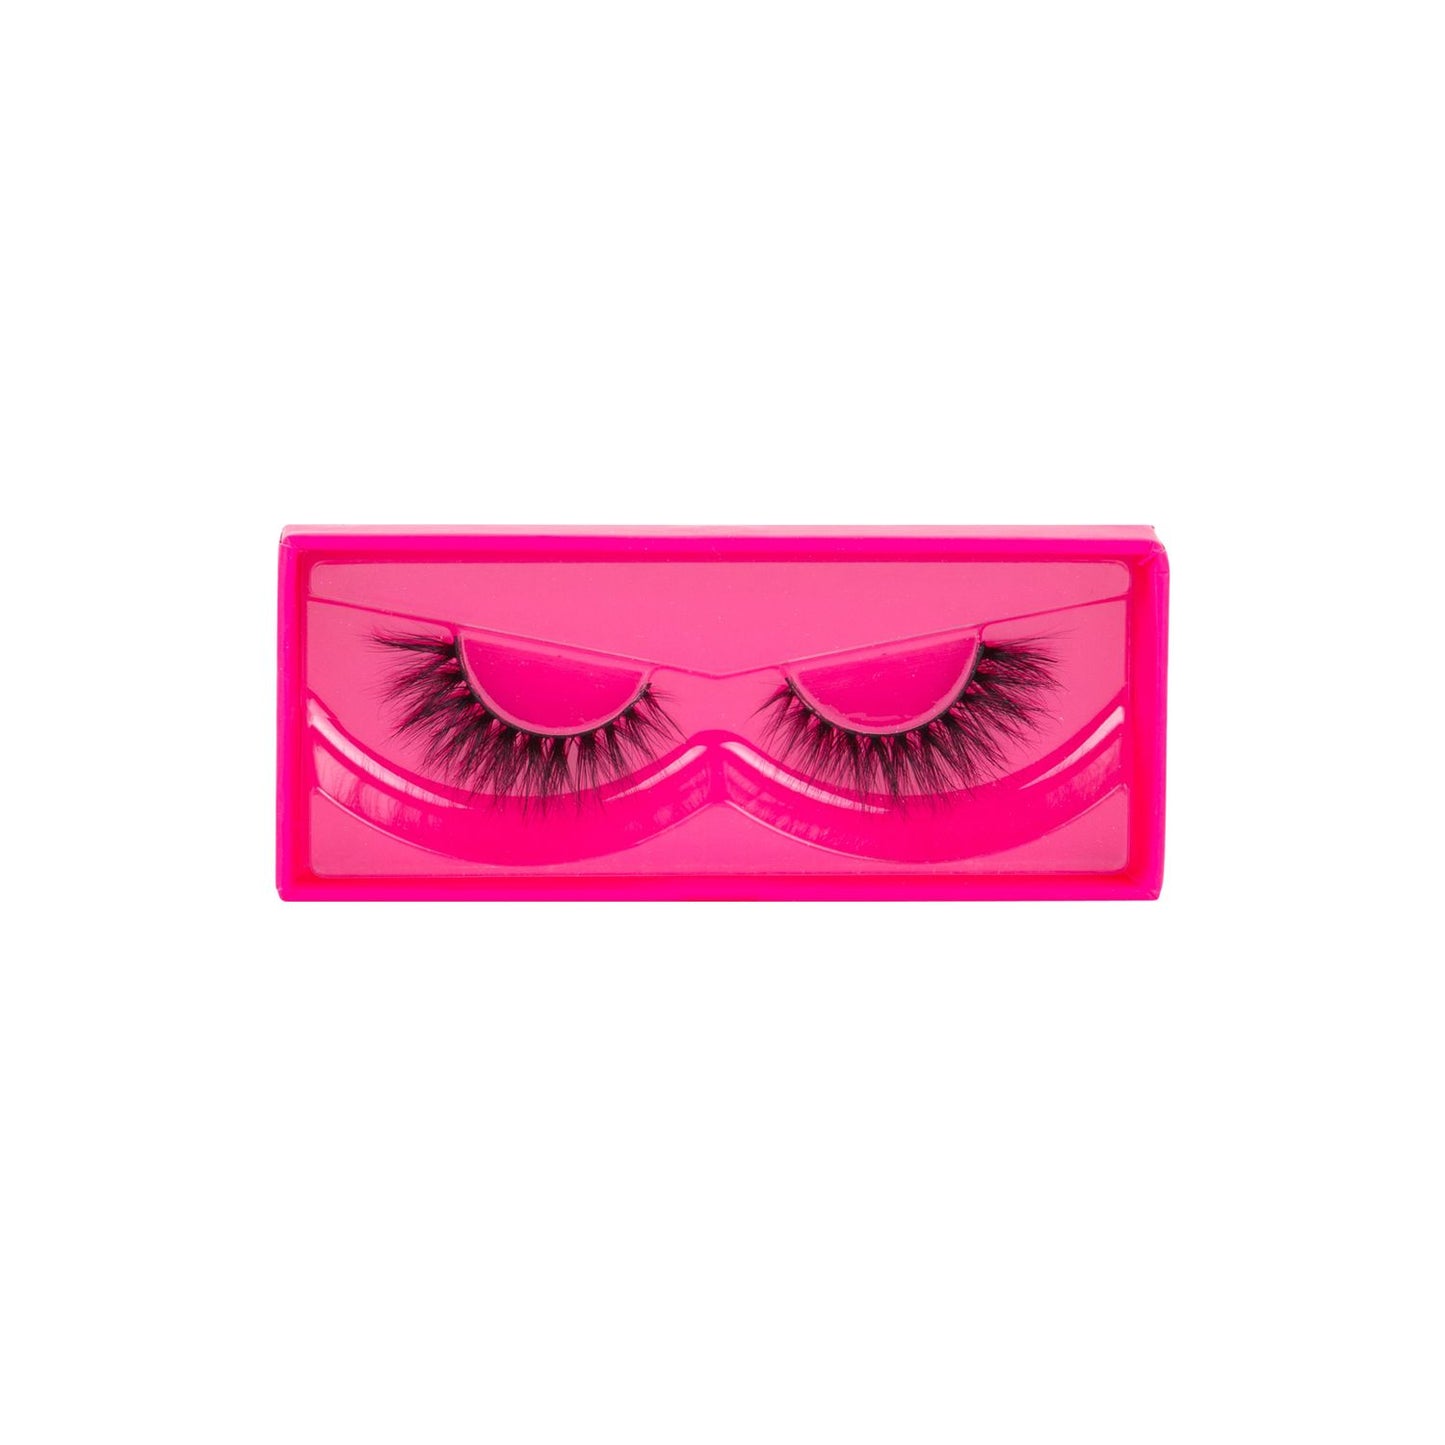 I Can't Even - 3D Faux Mink Lashes